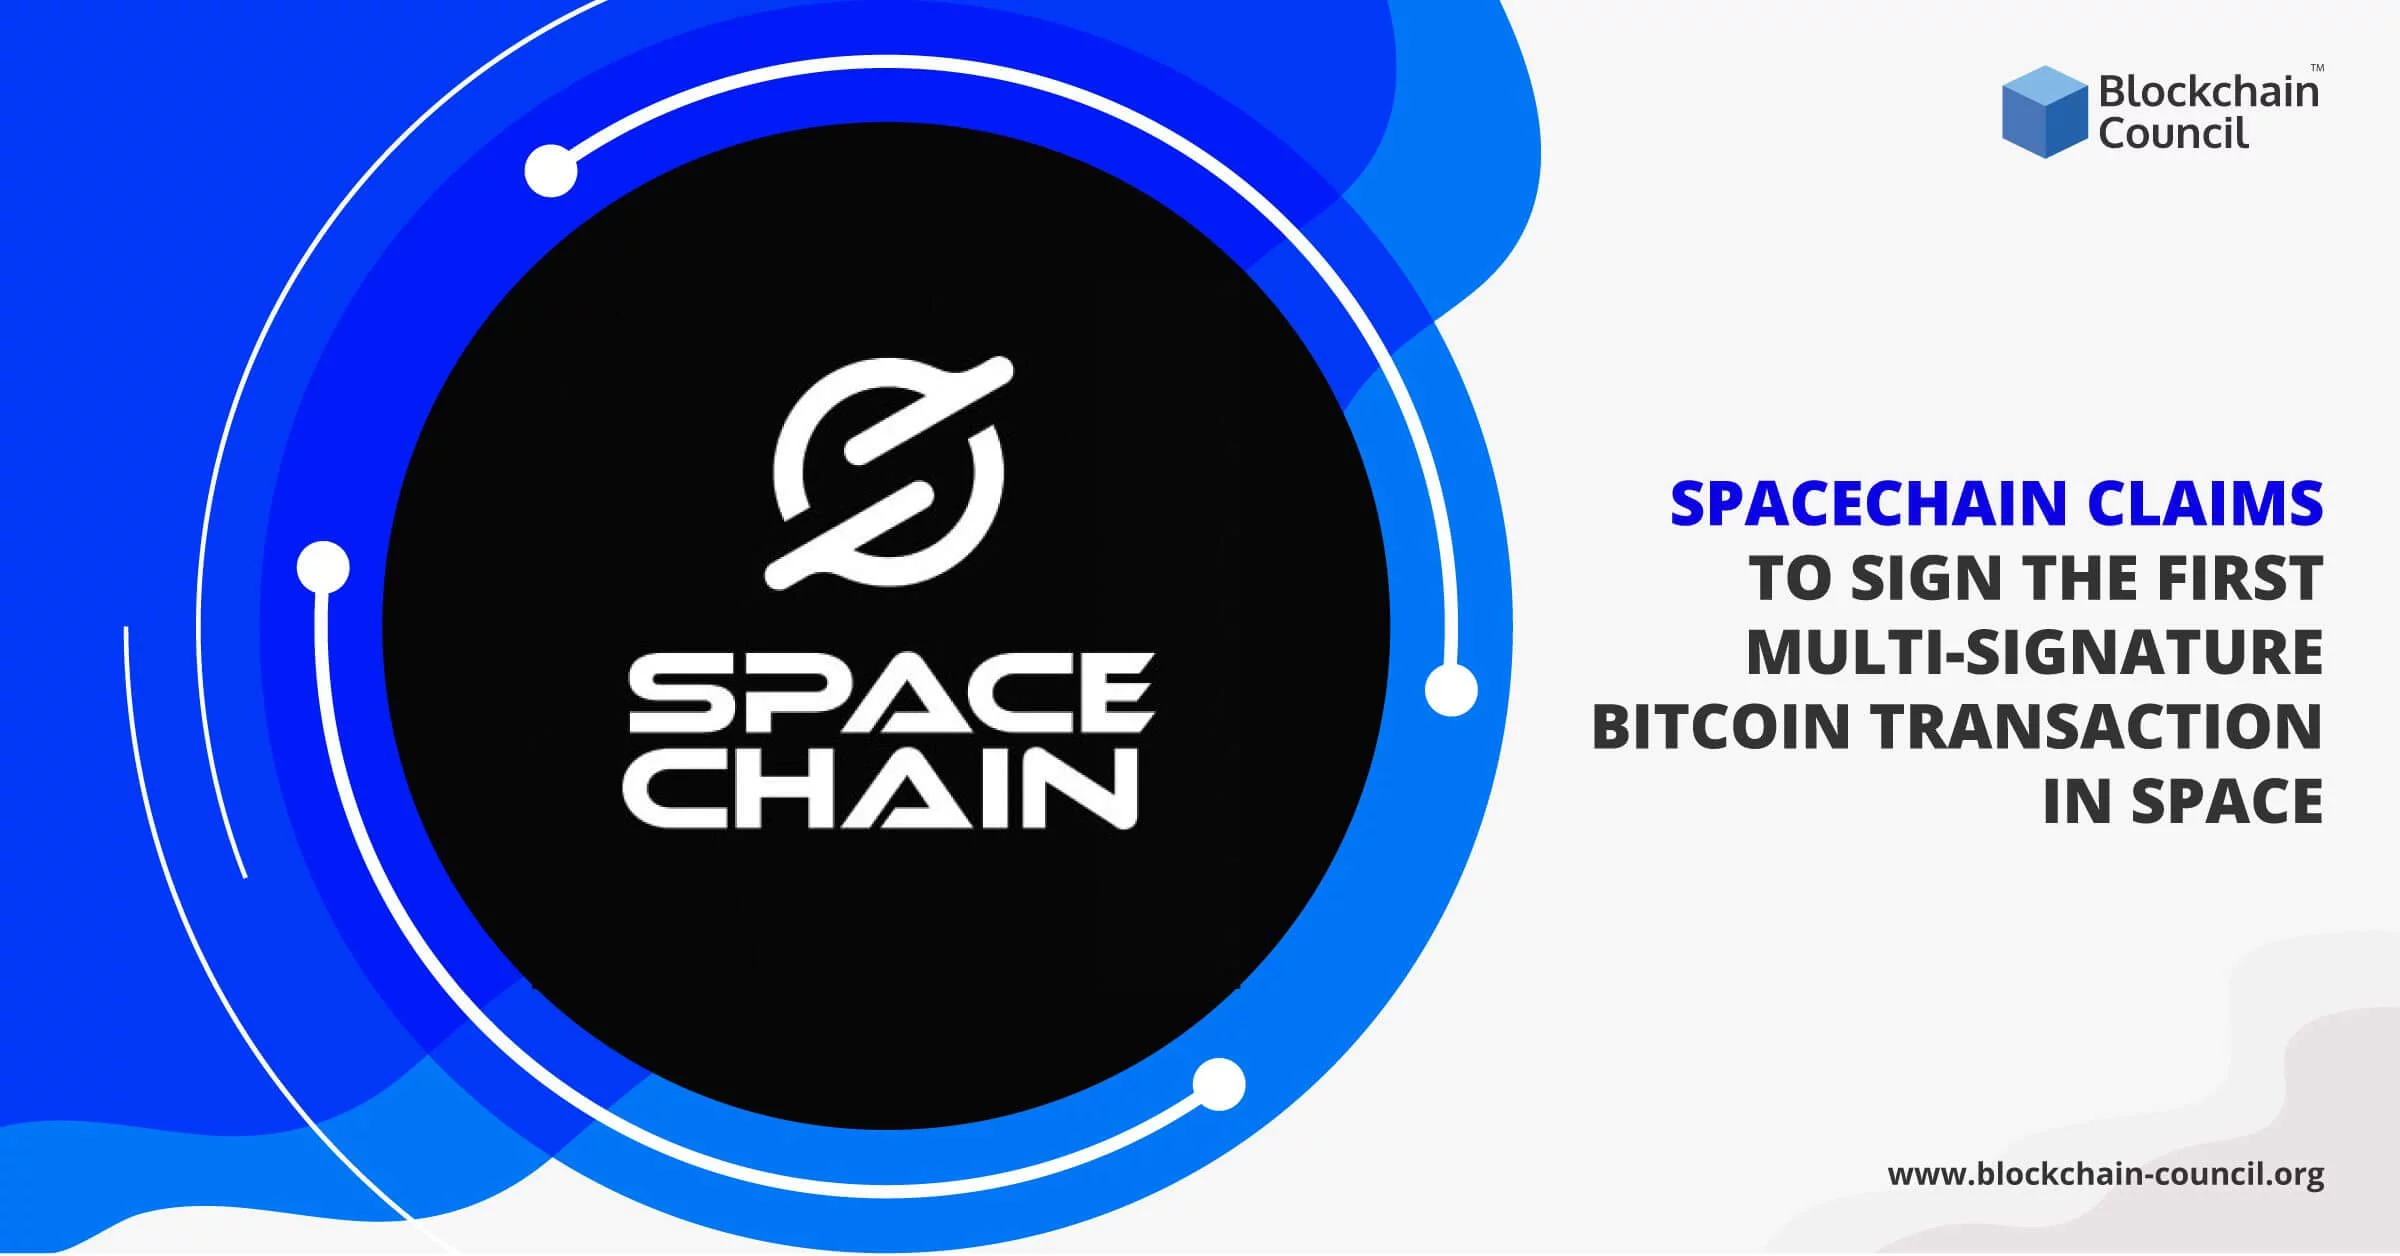 SpaceChain-Claims-to-Sign-the-First-Multi-Signature-Bitcoin-Transaction-in-Space